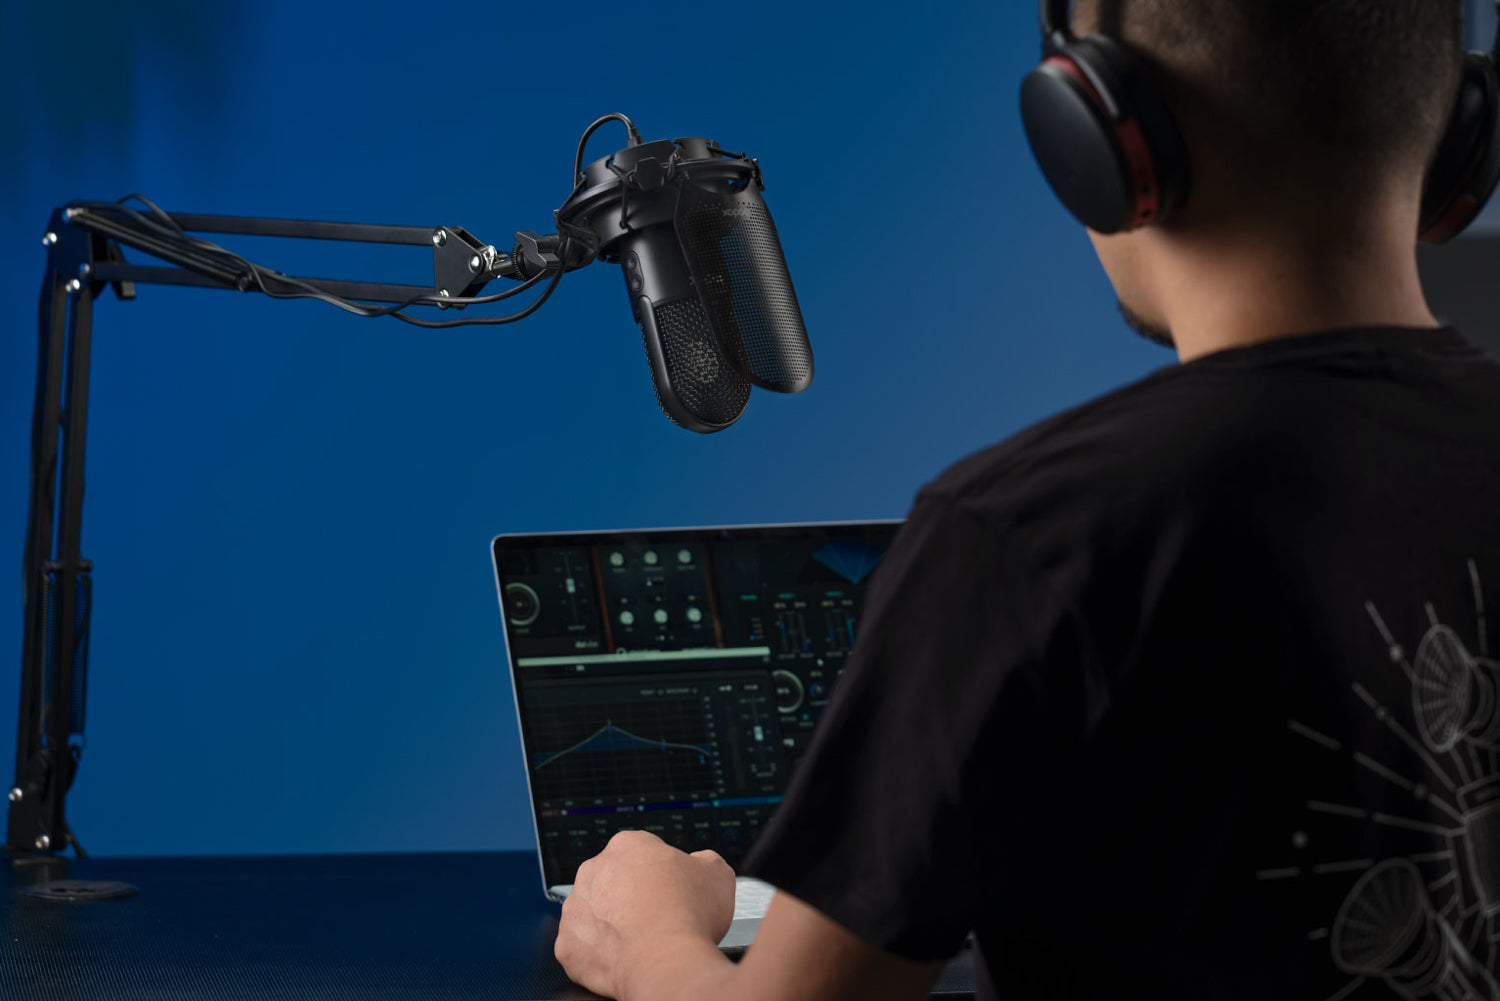 Podcast Microphones: Top 3 Choices for Beginners